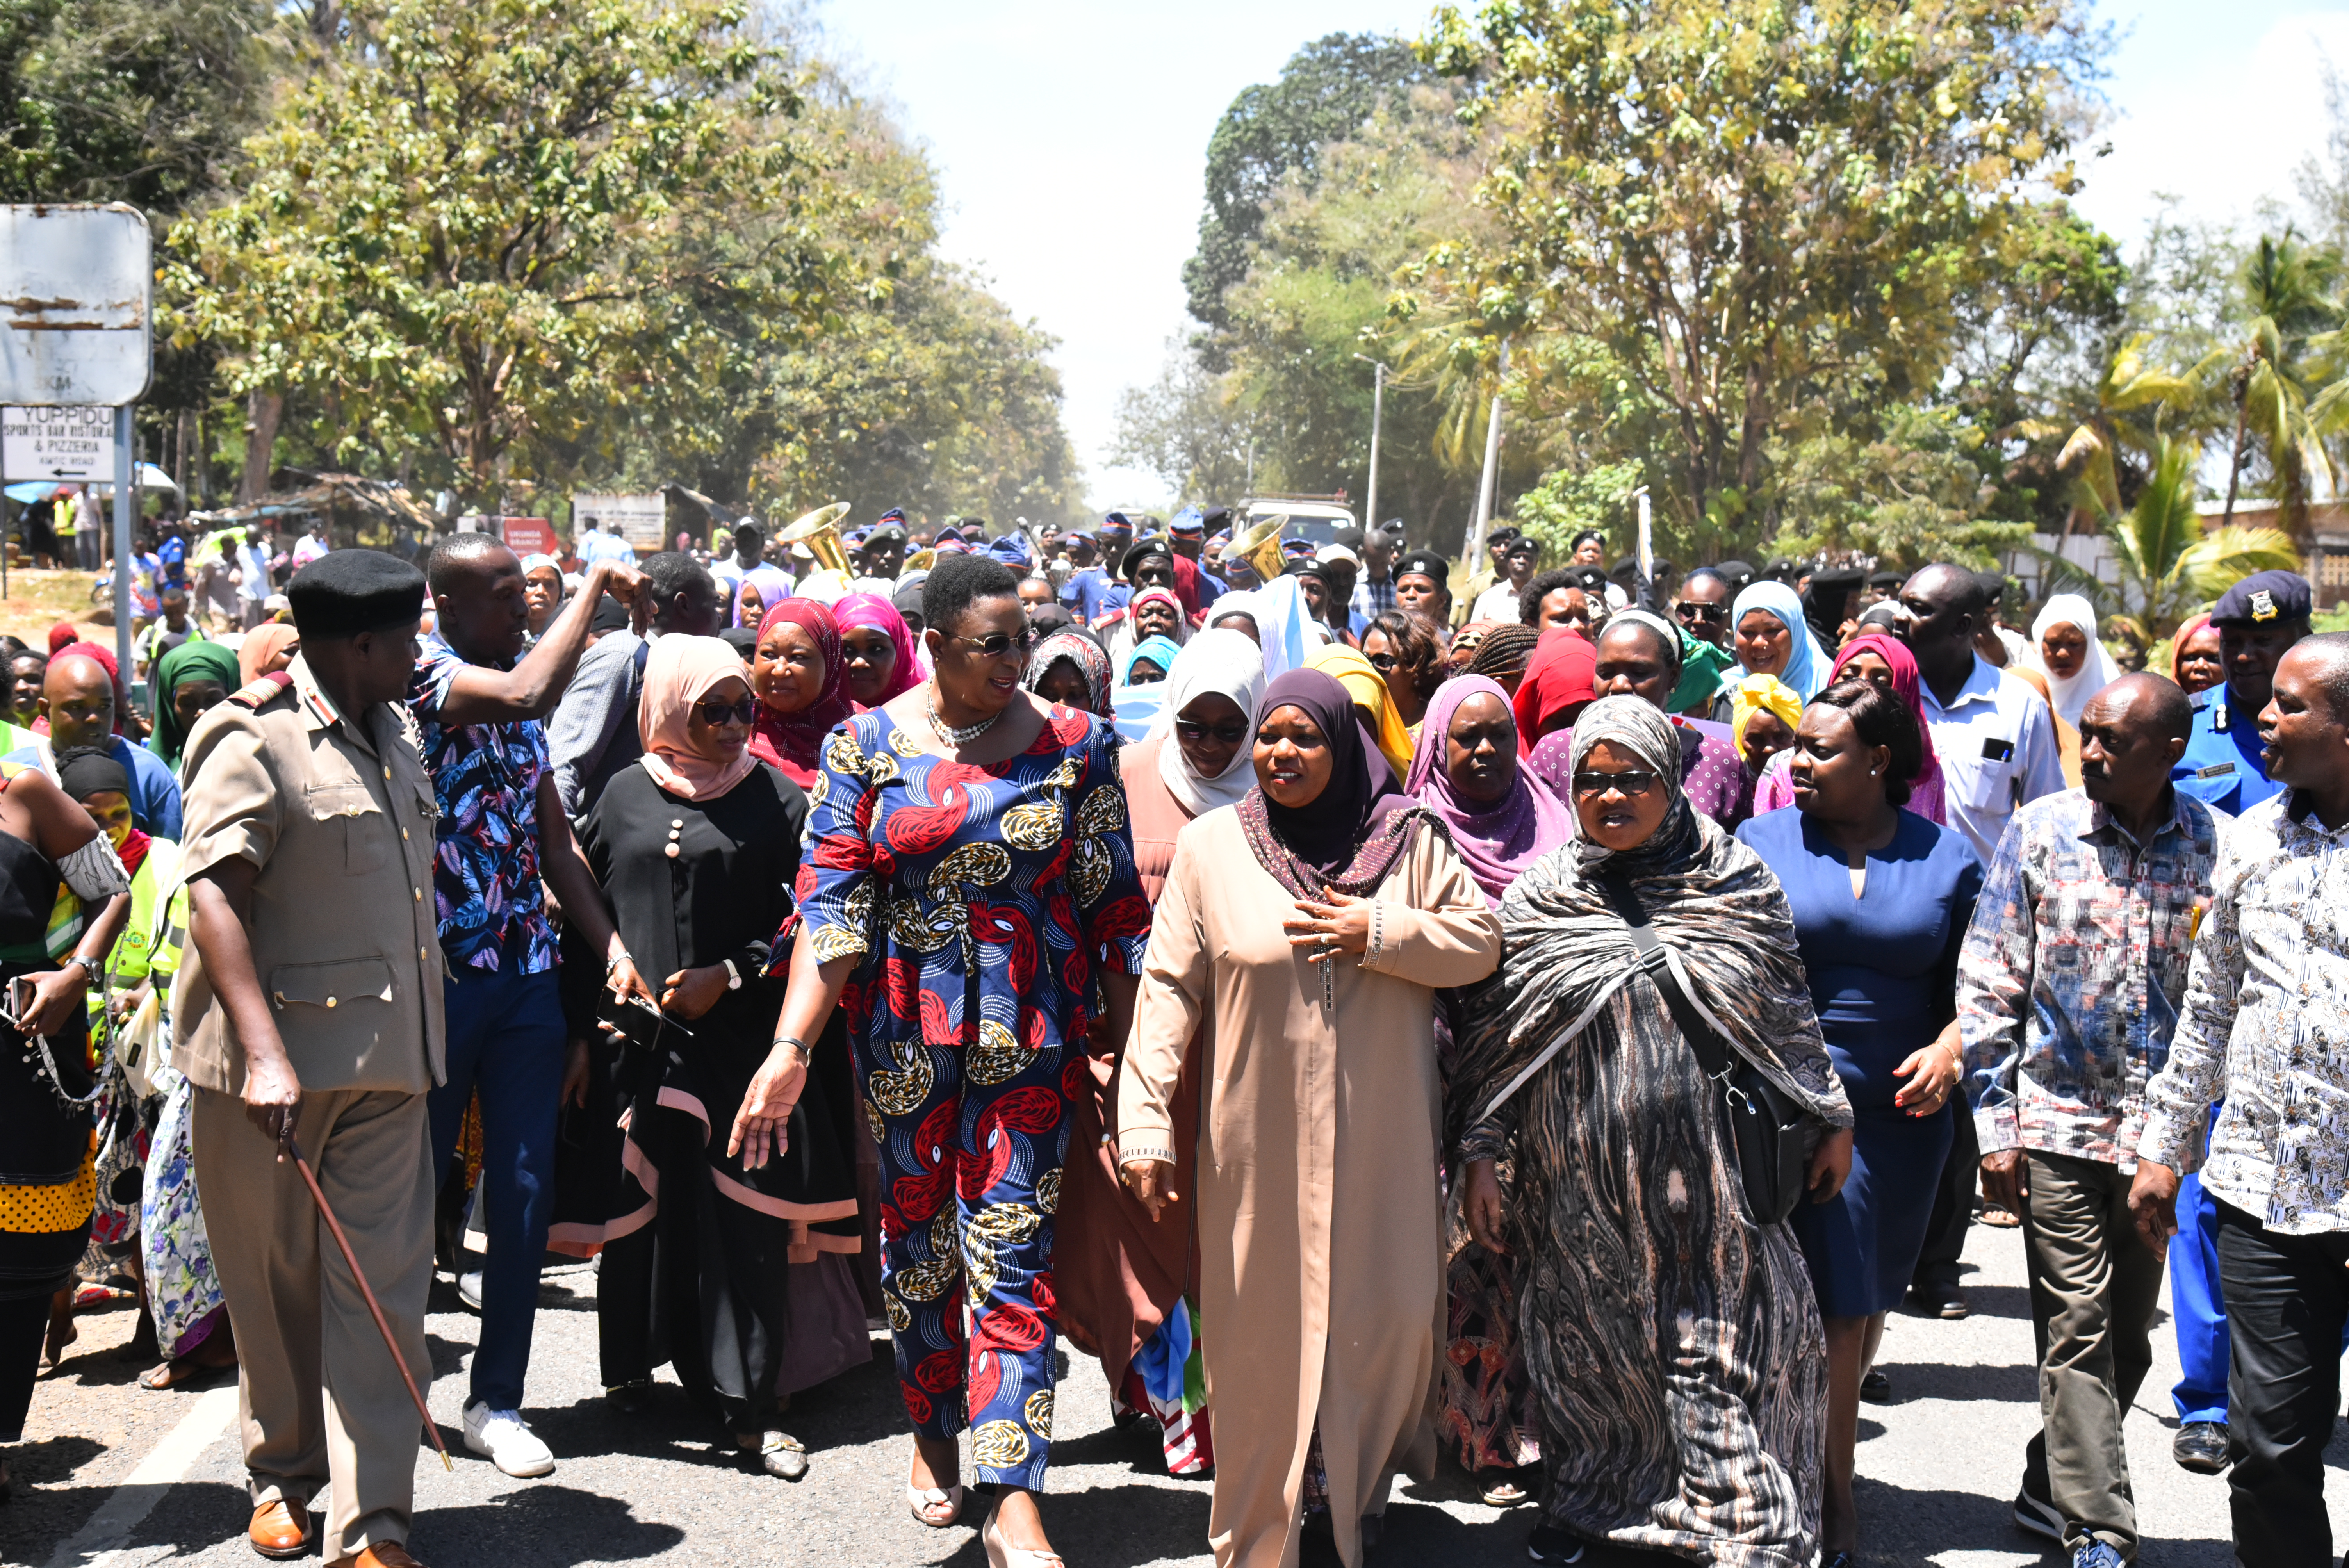 Governor Fatuma Achani (front centre) leading a march in Kwale County, alongside Kenya's Cabinet Secretary for Public Service, Gender and Affirmative Action, Aisha Jumwa (font left). Photo: UN Women/Luke Horswell